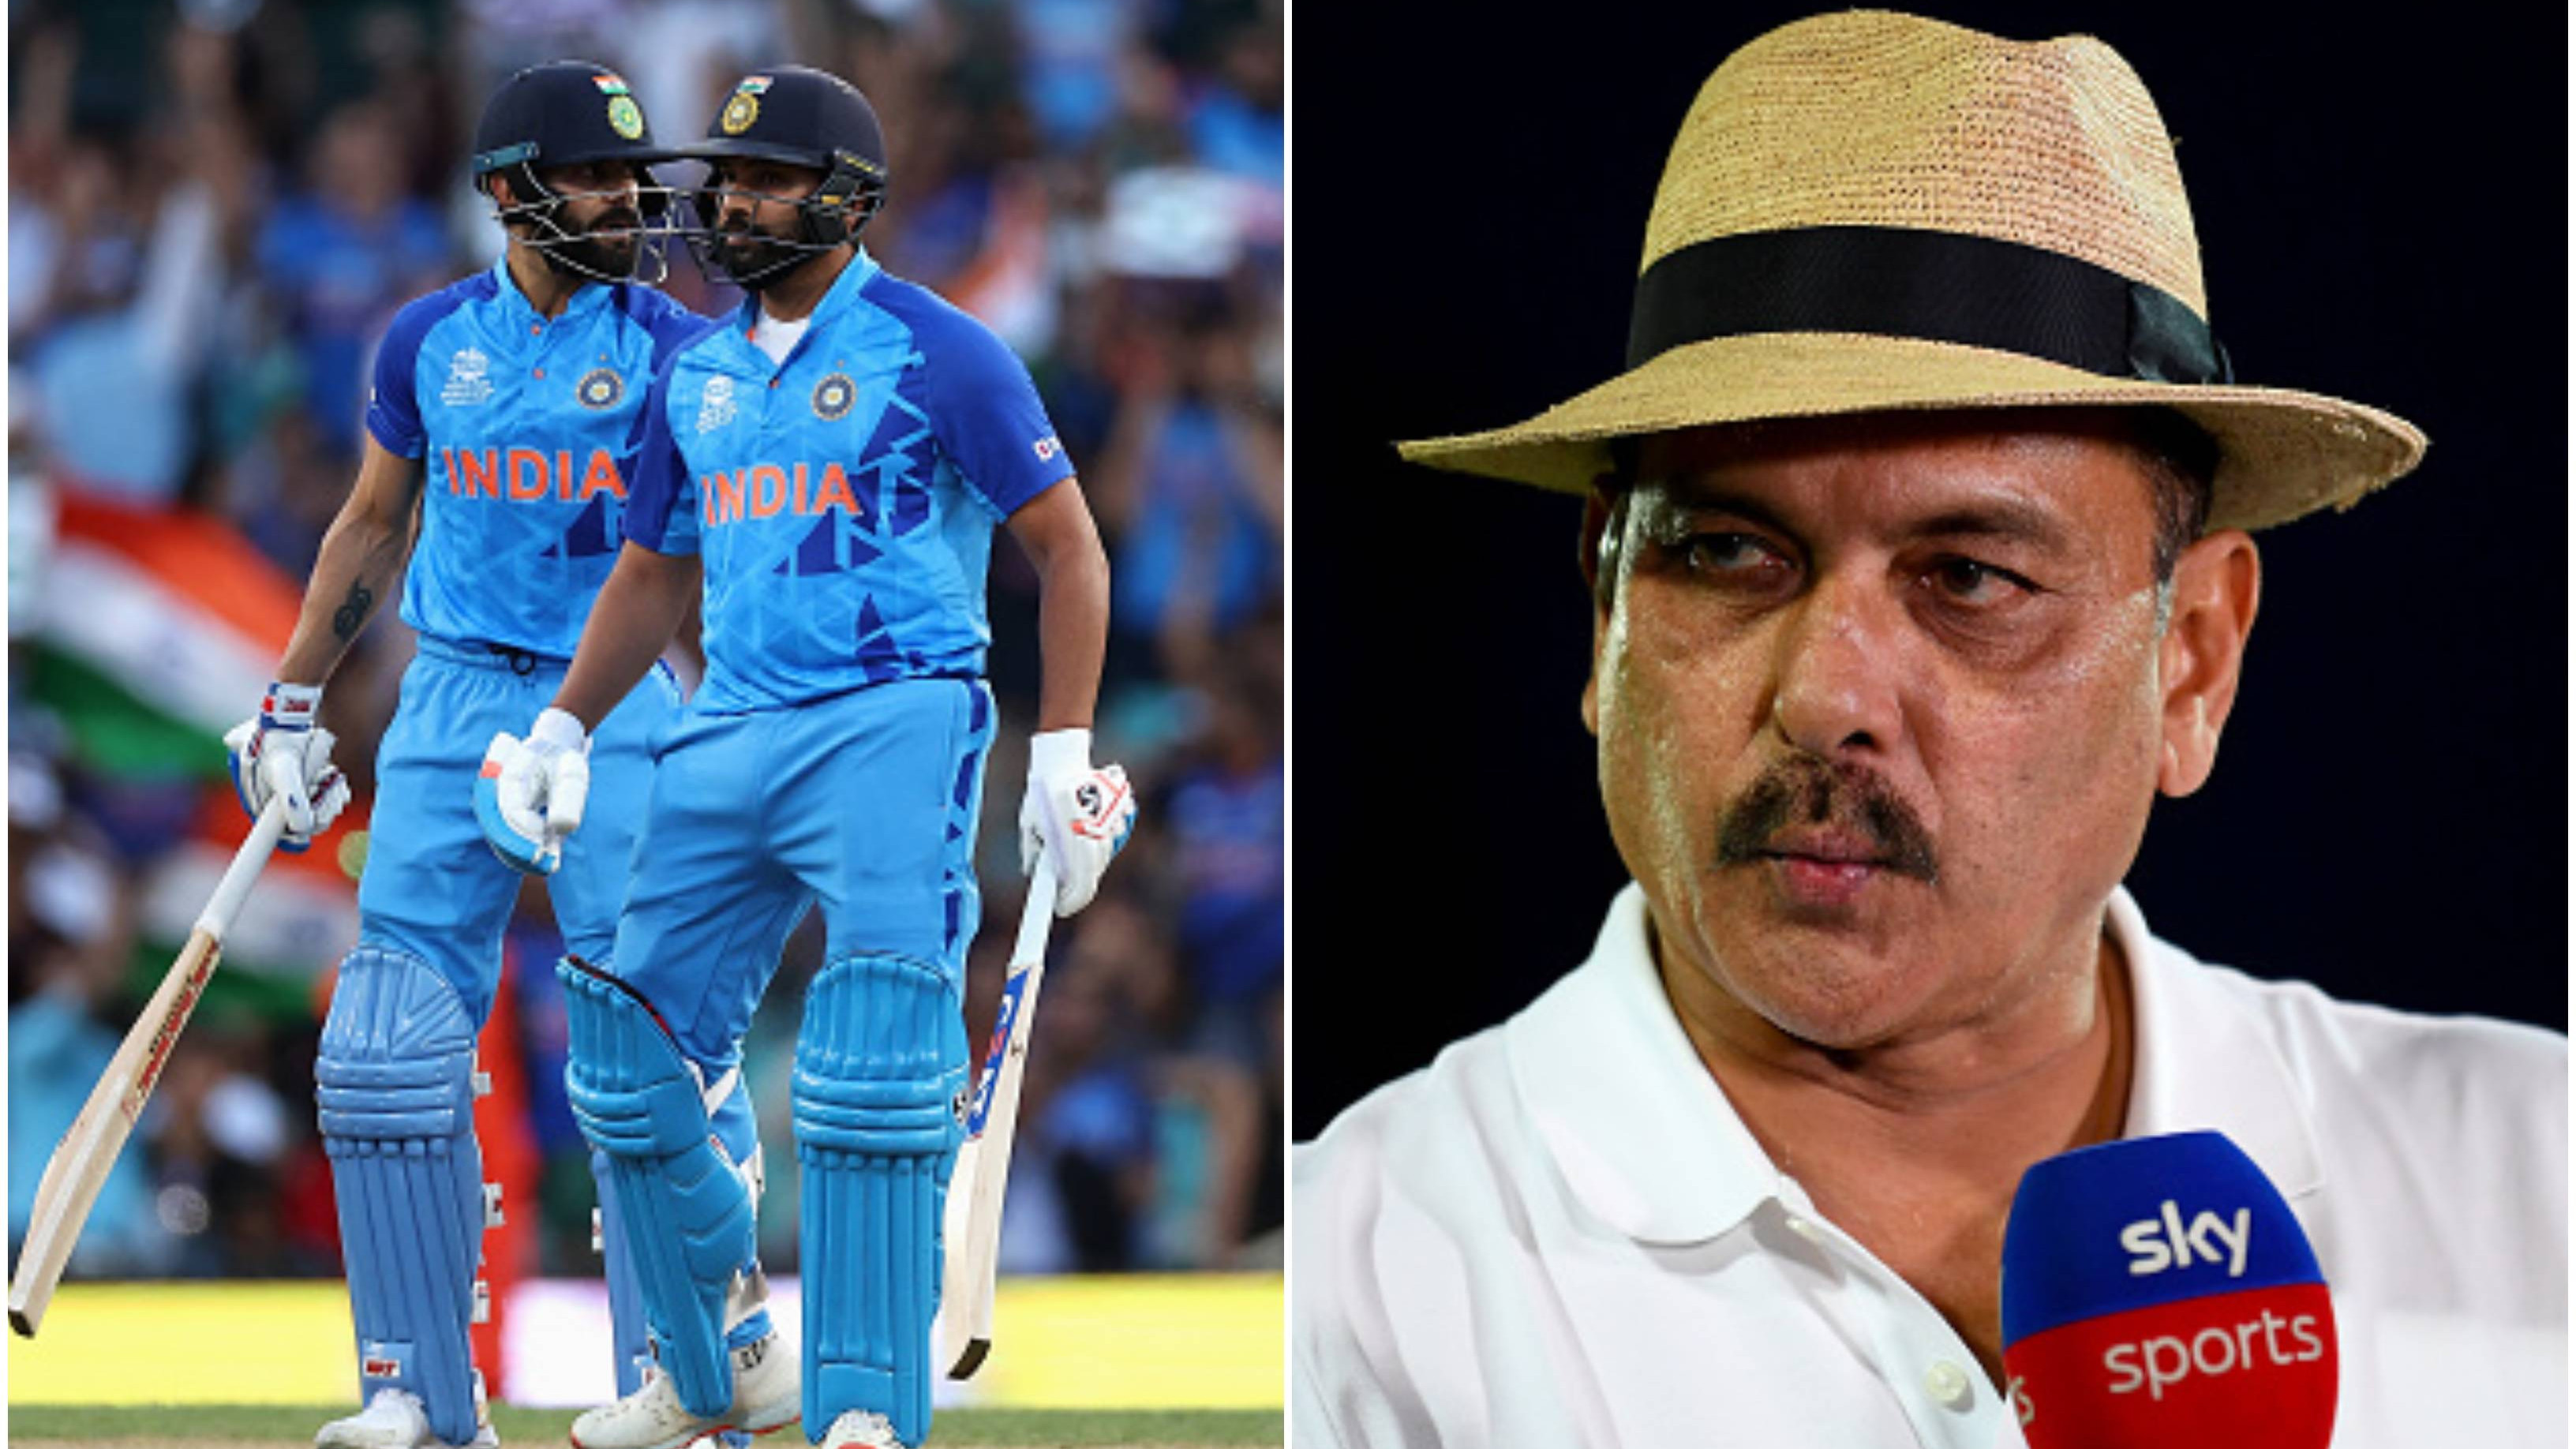 “All of this is merely time pass,” Ravi Shastri reacts to rumors of rift between Virat Kohli and Rohit Sharma